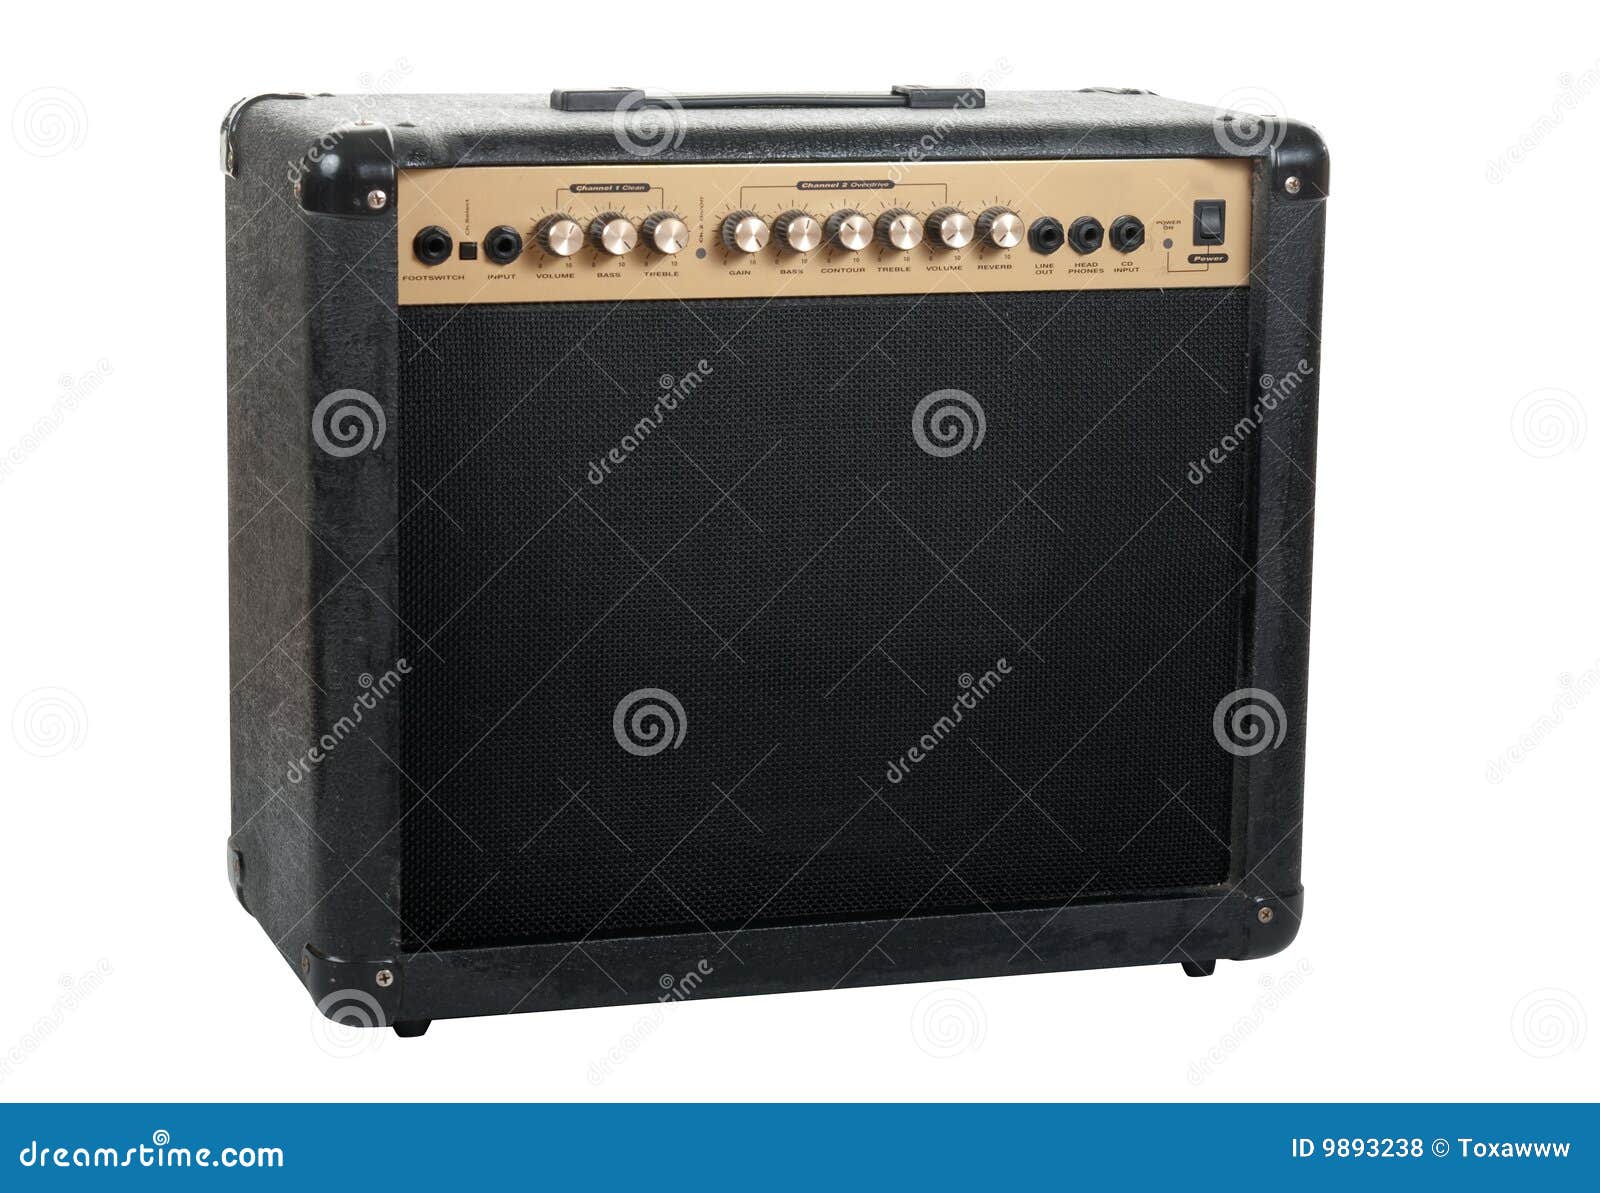 Handheld guitar amplifier isolated over white background in studio 